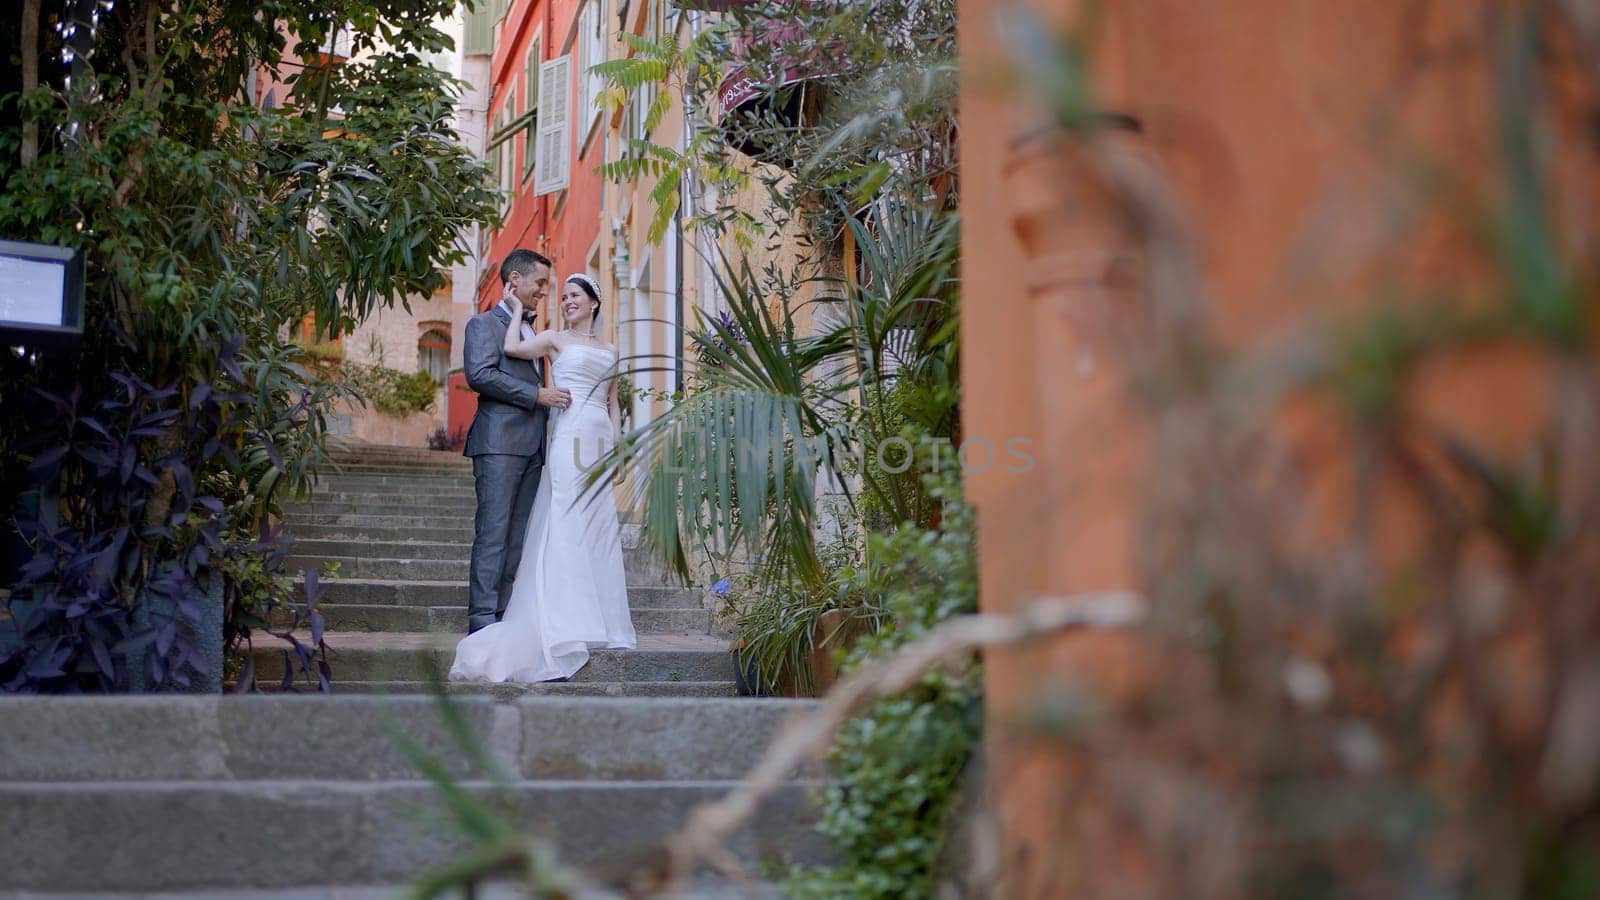 Newlyweds taking pictures on the street. Action. A young couple with a bride in a white dress and a man in a suit who are photographed in full height on the steps next to the architecture of the city. High quality 4k footage